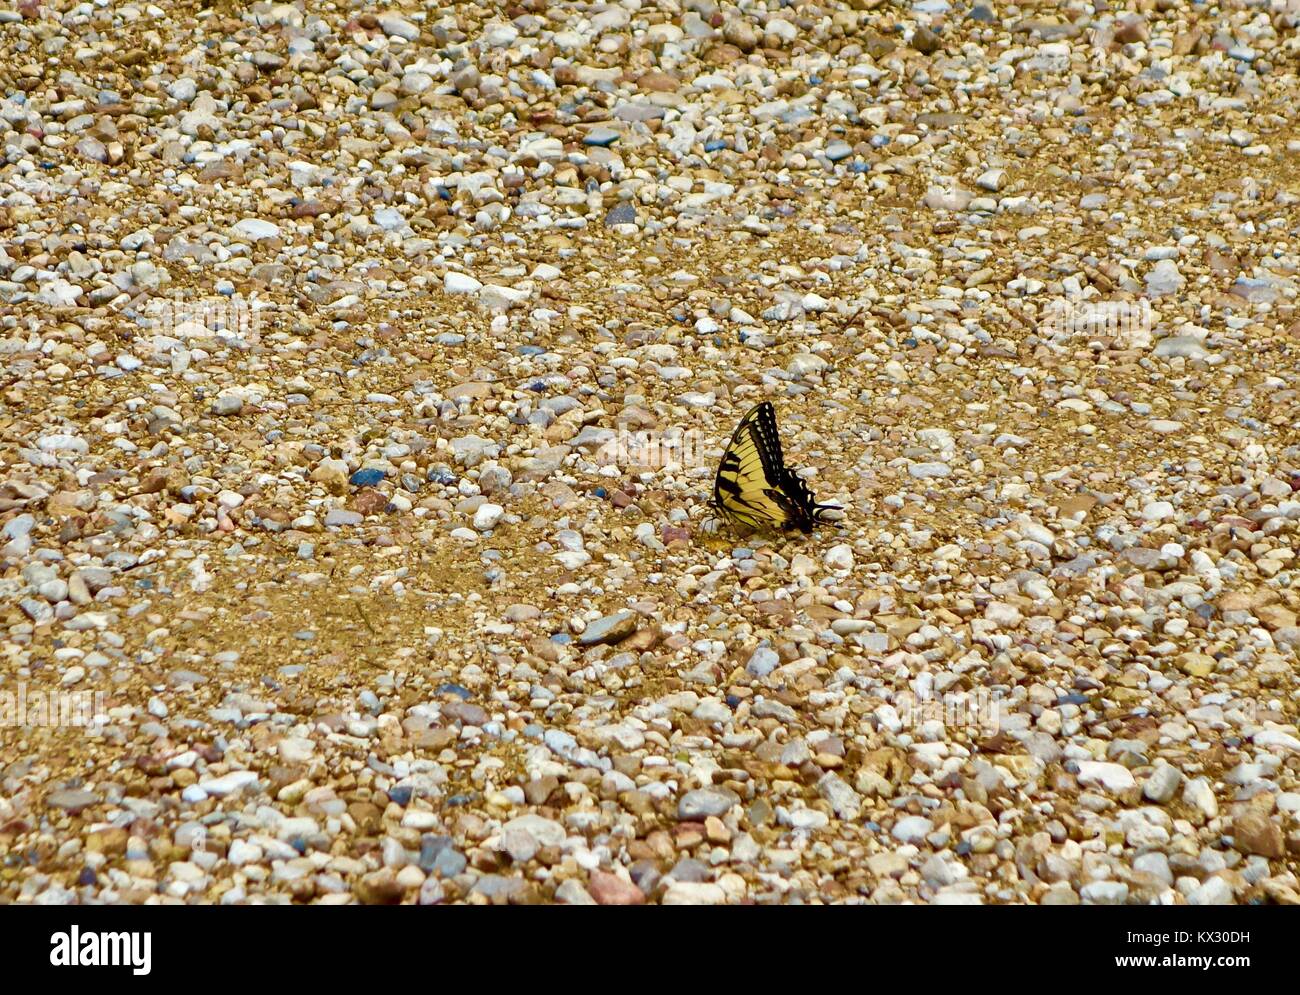 A yellow butterfly resting on gravel Stock Photo